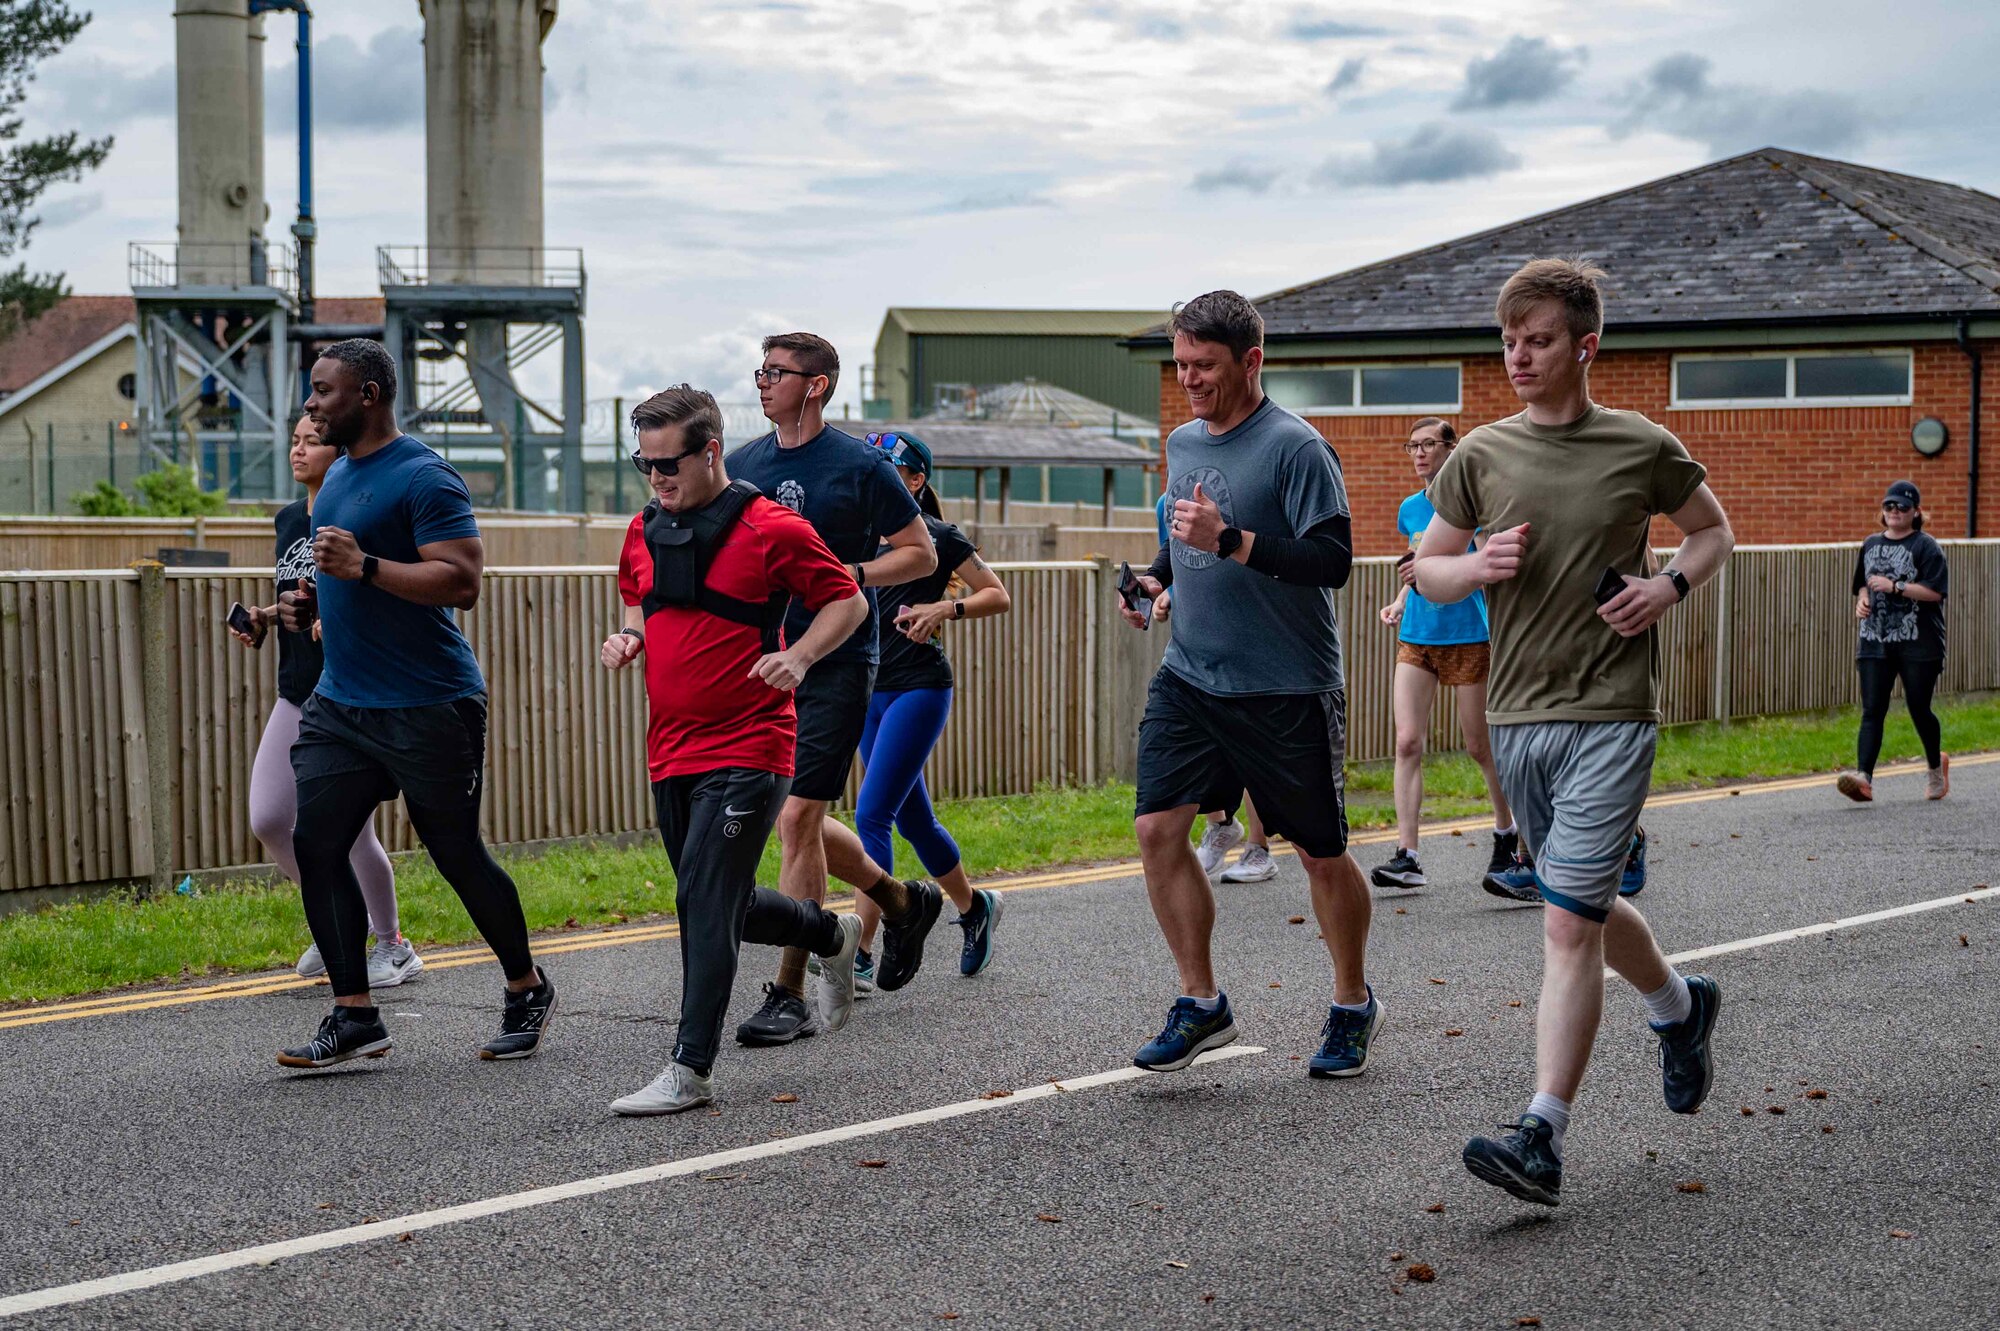 A group of Airmen run a 5k to celebrate the kick off of Asian American and Pacific Islander month at Royal Air Force Mildenhall, England, May 5, 2022. This year, events including a volleyball tournament, children’s story time, and trivia night are scheduled to highlight the monthly observance. (U.S. Air Force photo by Senior Airman Viviam Chiu)